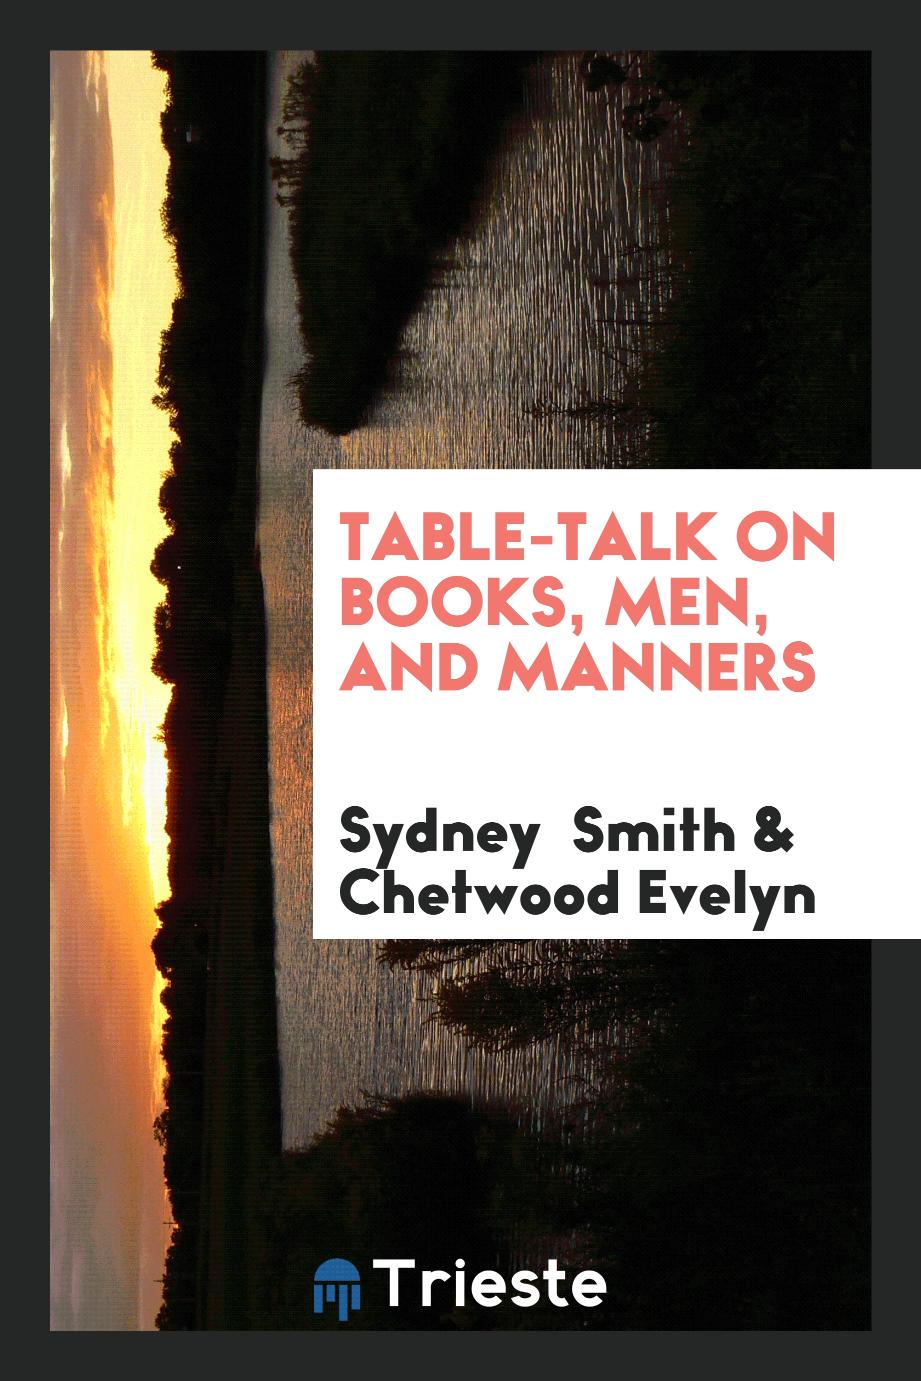 Table-Talk on Books, Men, and Manners